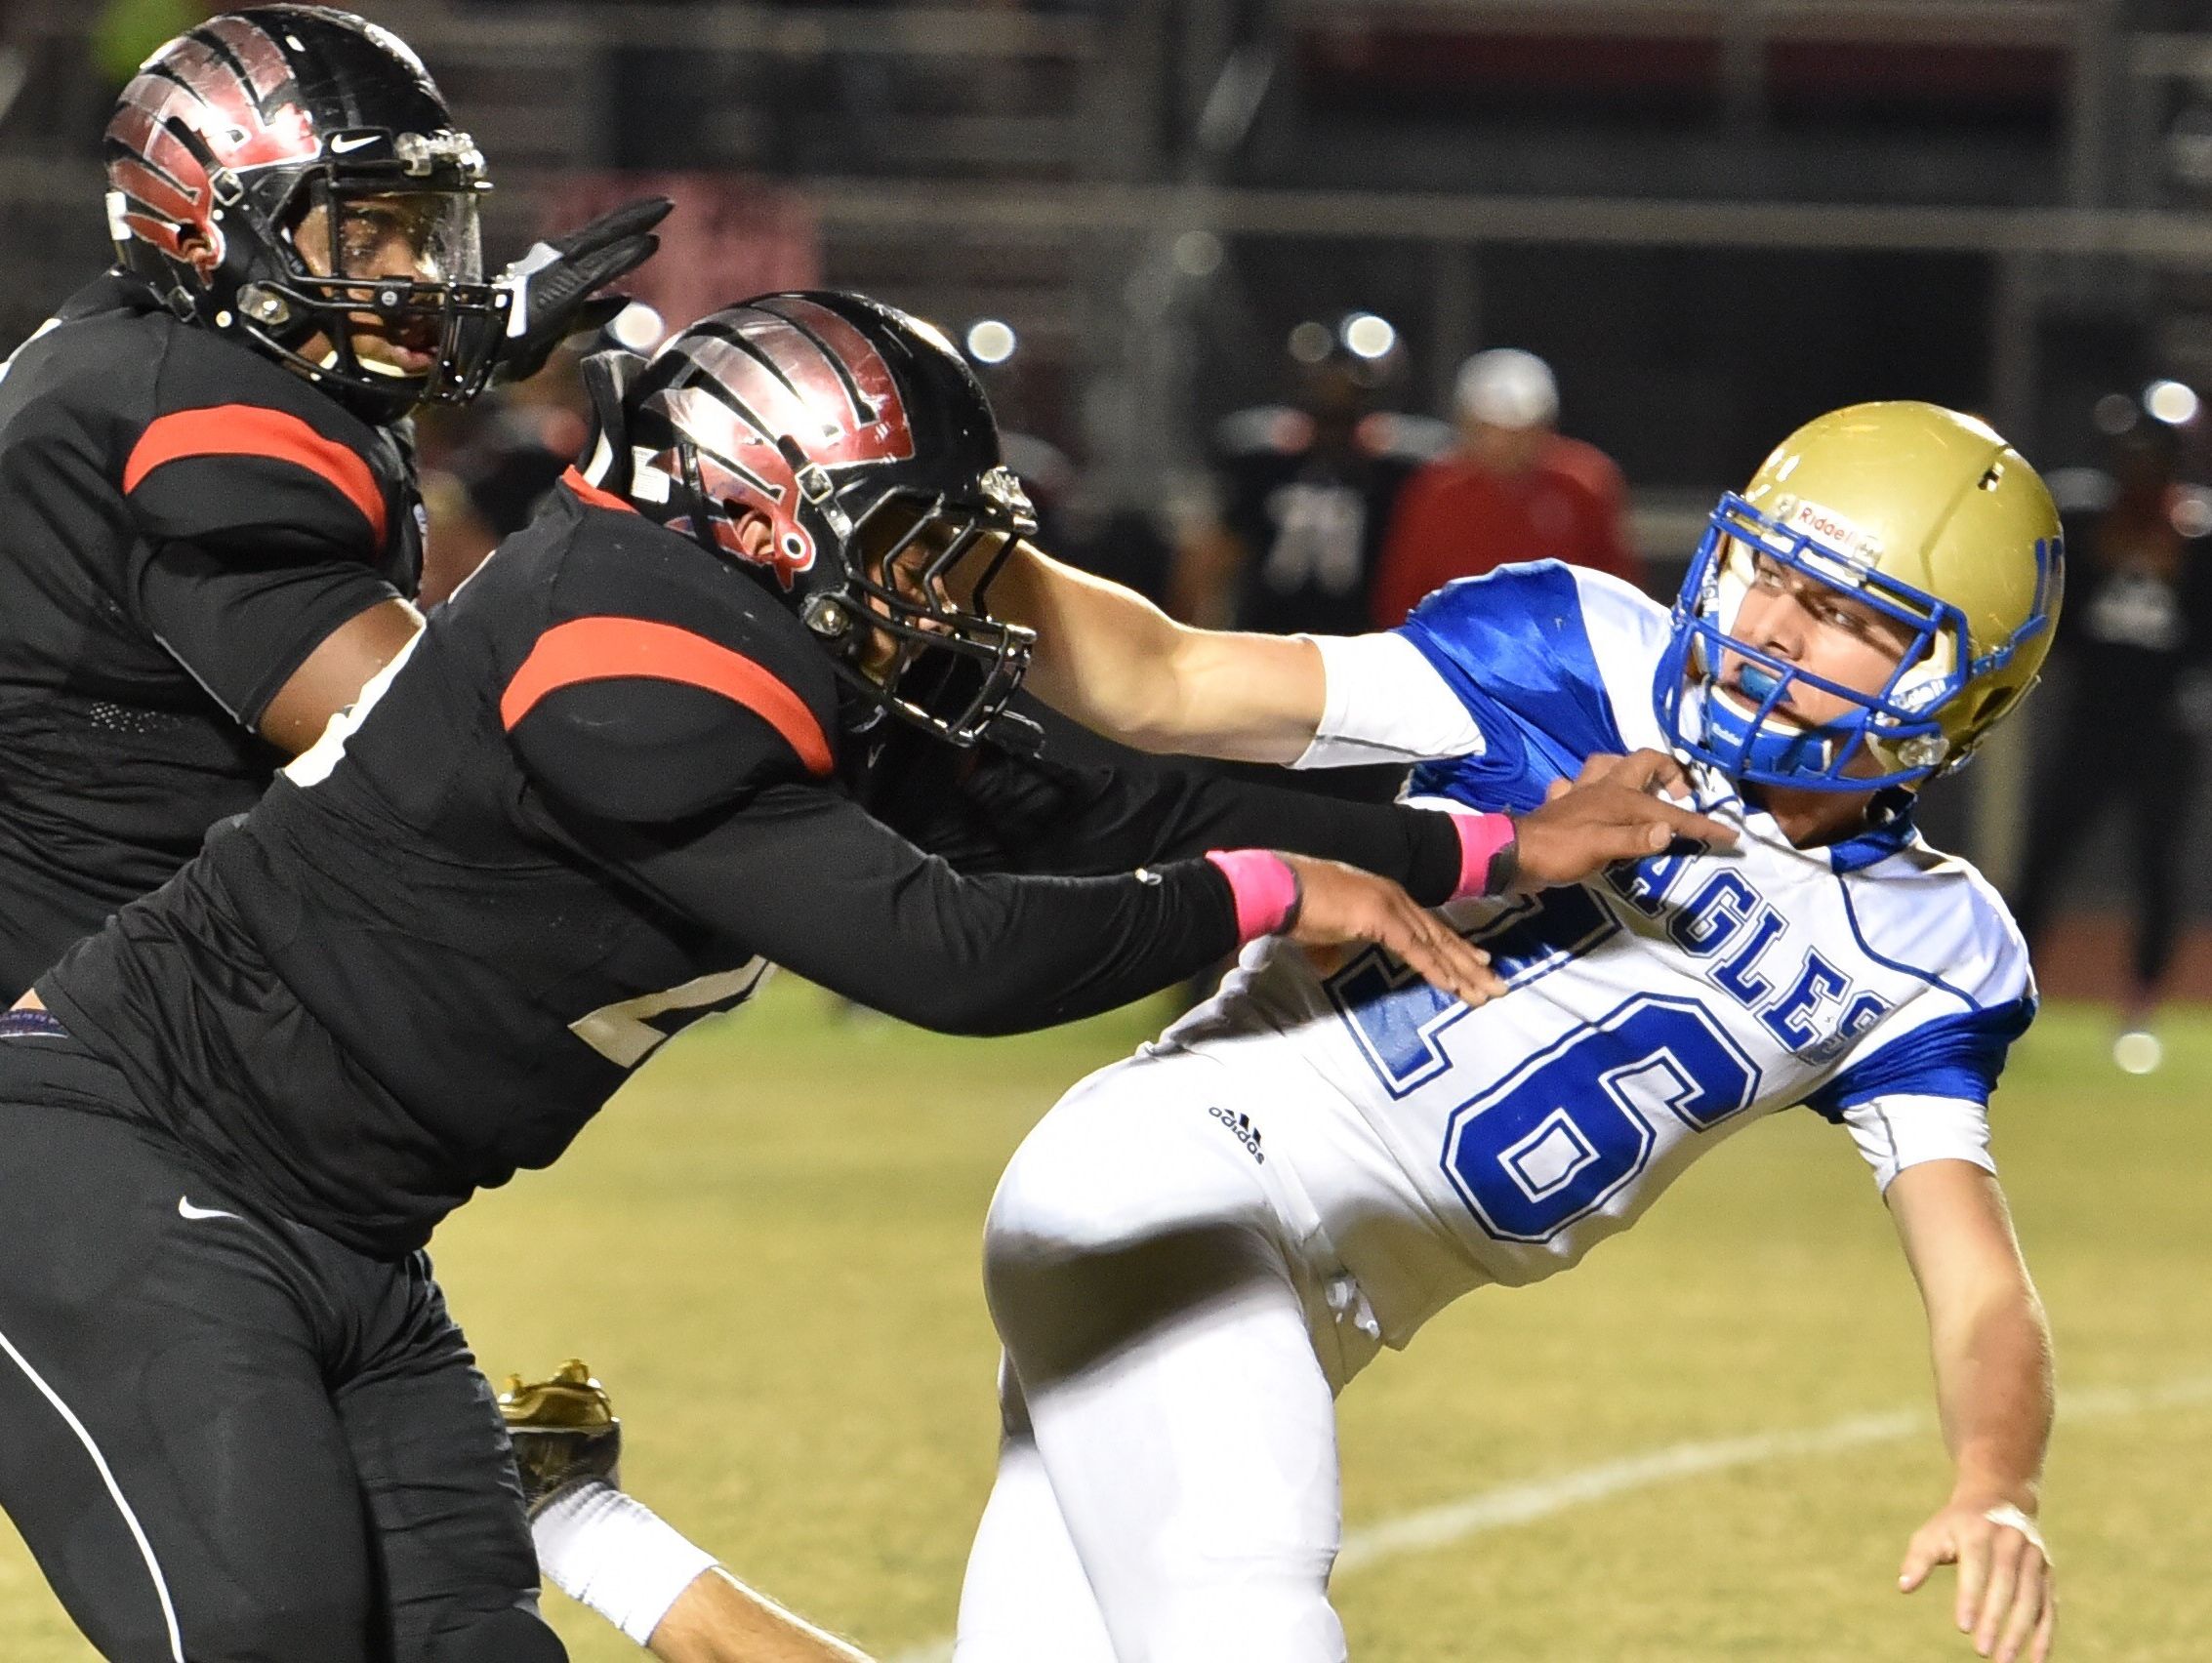 Shelbyville captured a 49-47 victory over Stewarts Creek last Friday.